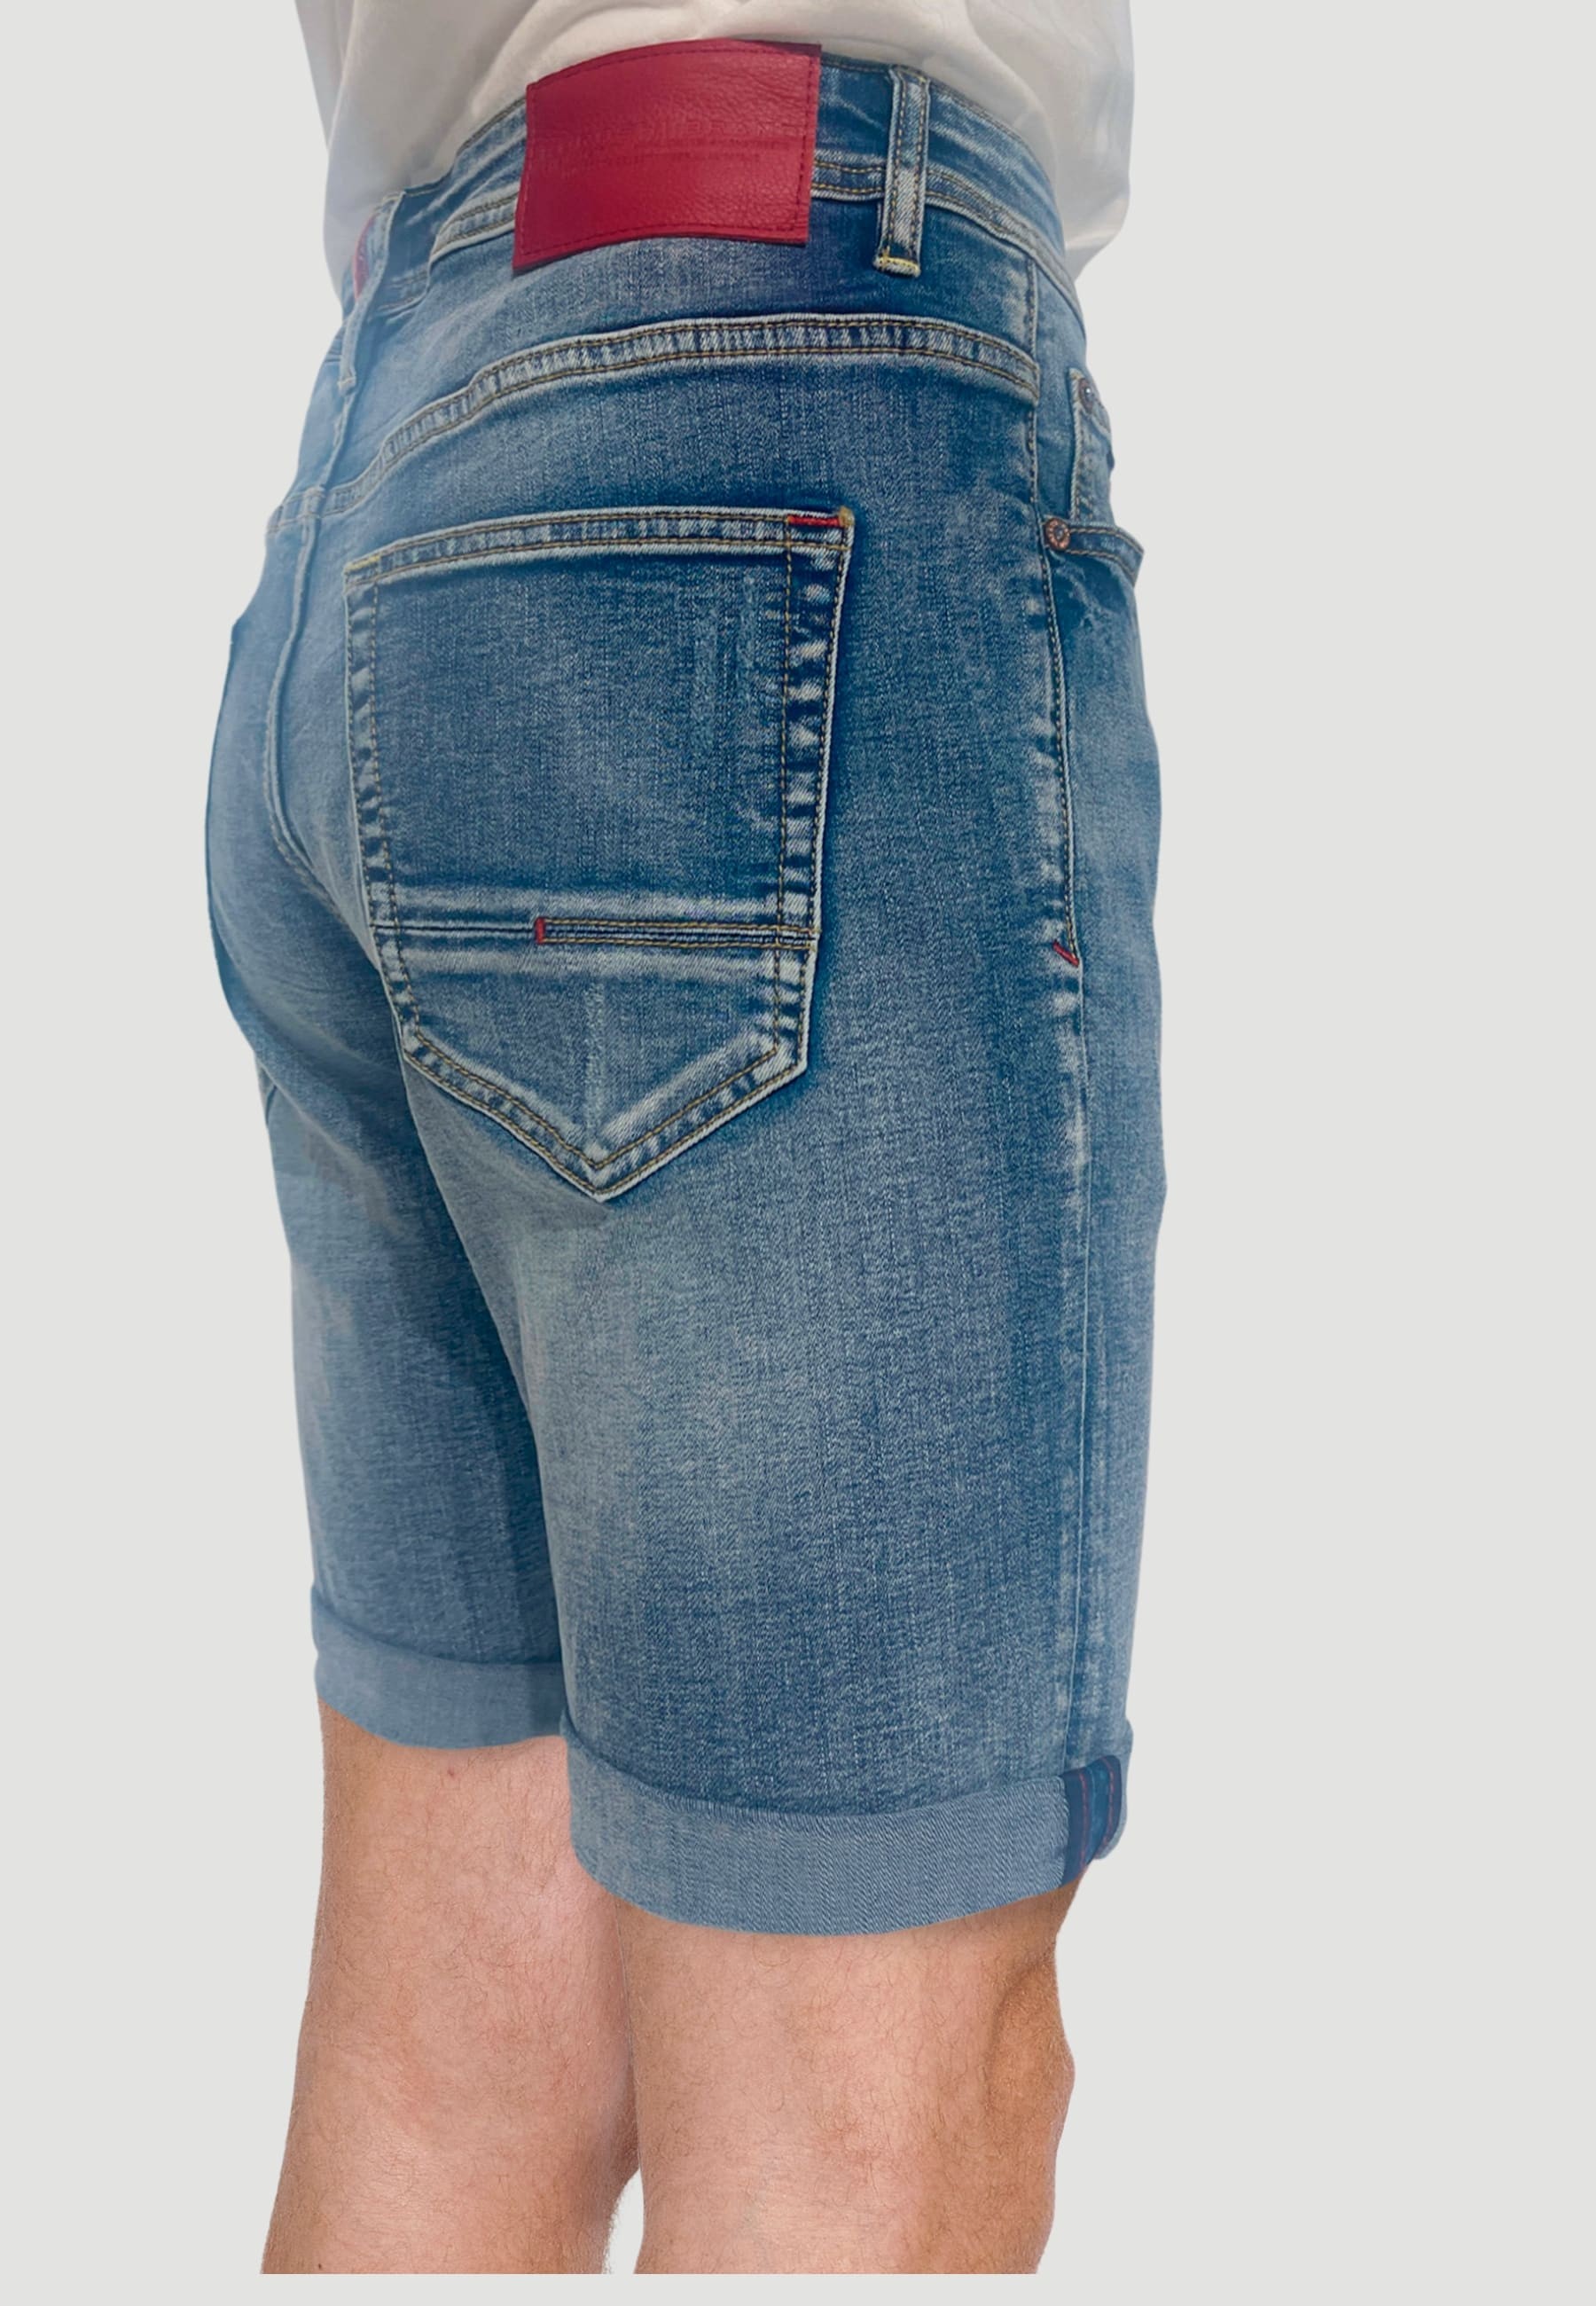 Denim Bermuda shorts with turn-up finish and front zipper and button closure with five pockets, one pocket pocket, in Blue for Men 2